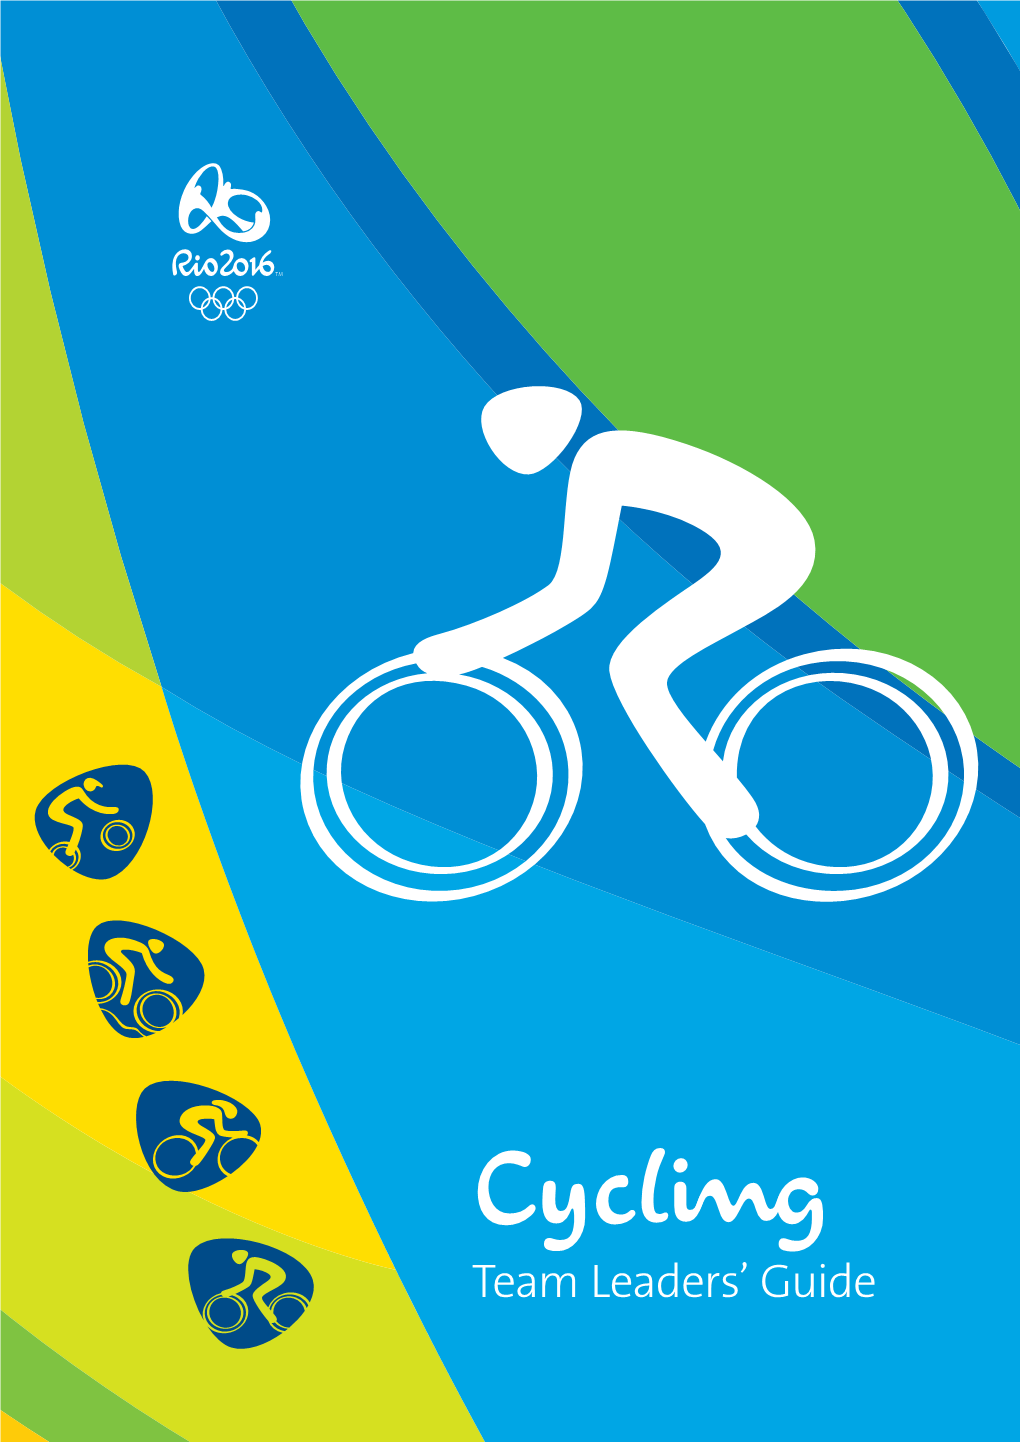 Cycling Team Leaders’ Guide Welcome! on Behalf of the Entire Organising Committee, It’S an Honour to Introduce This Team Leaders’ Guide for the Rio 2016 Olympic Games